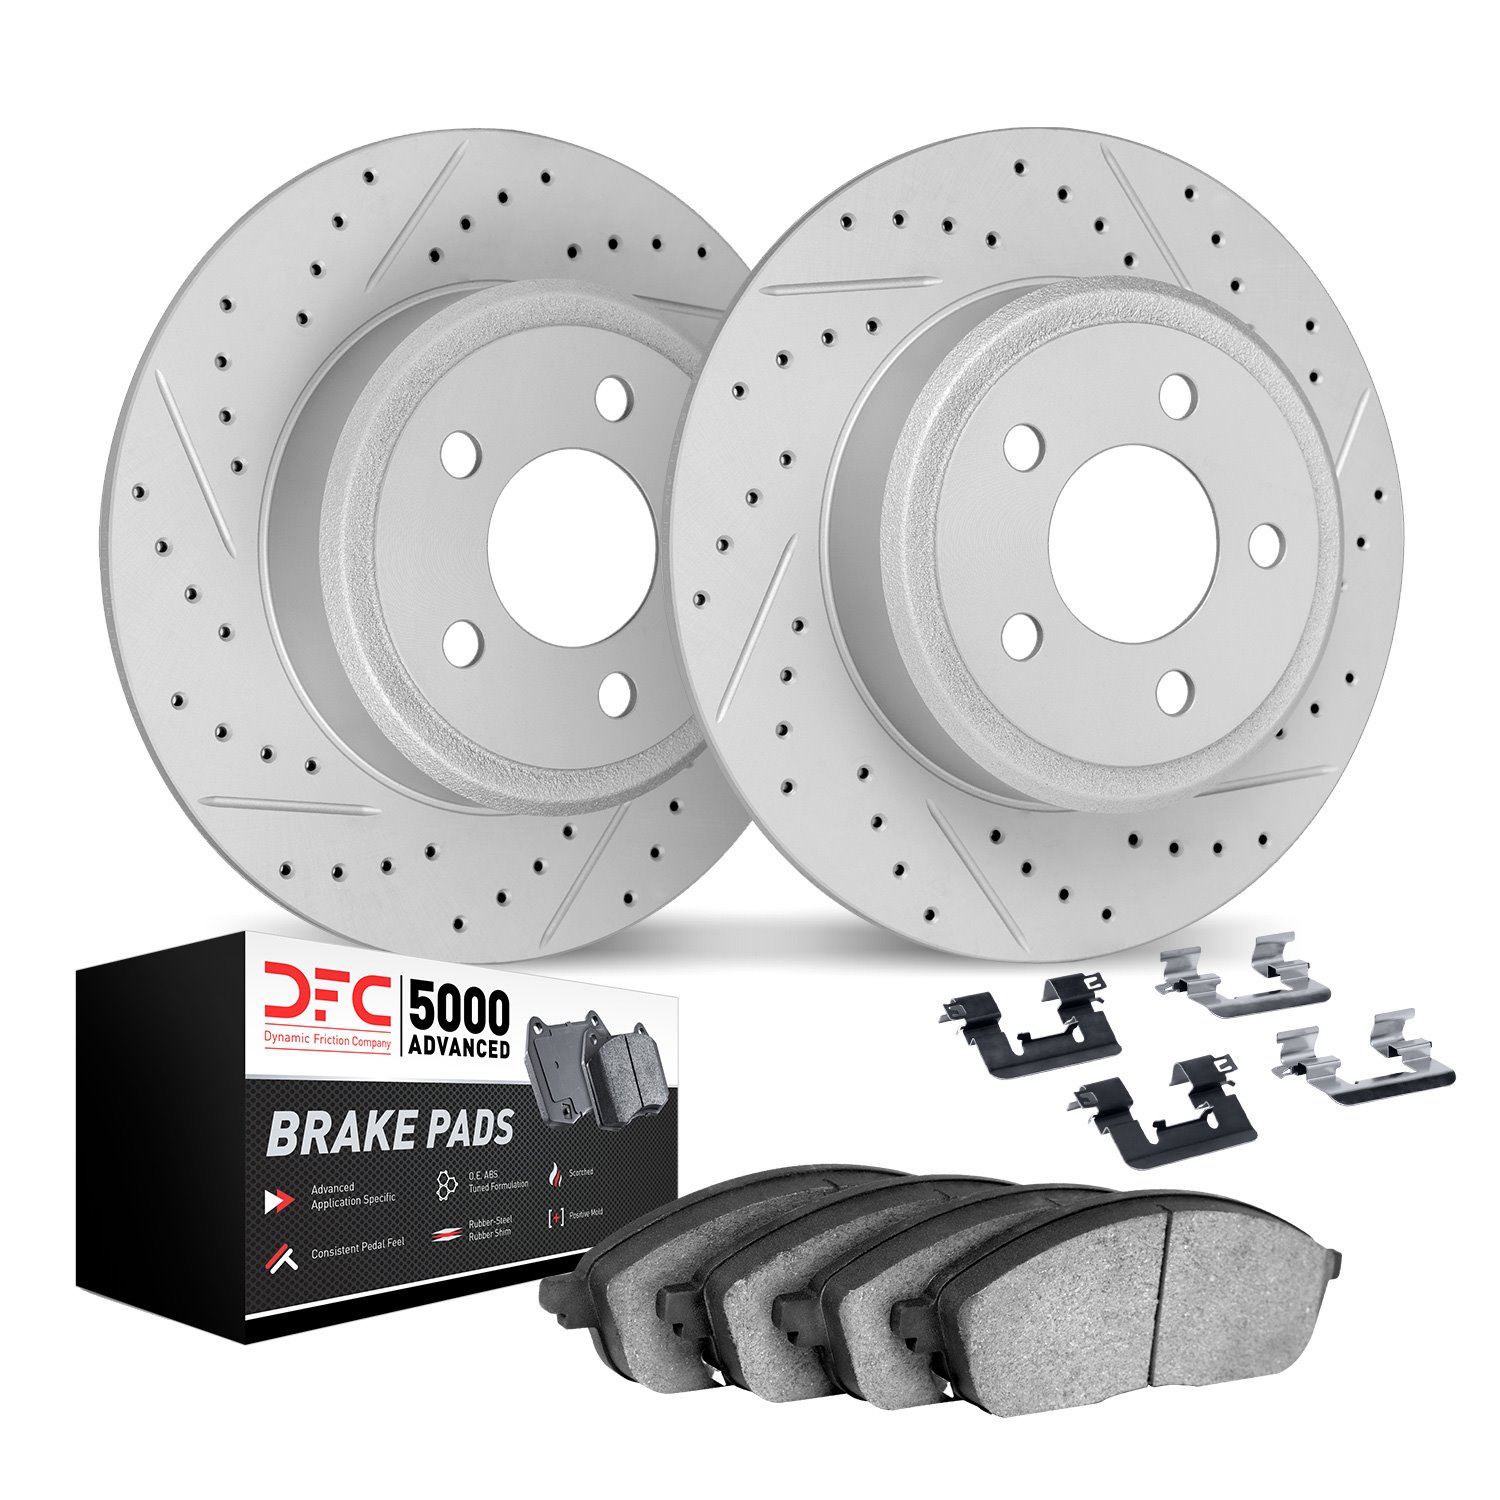 2512-80087 Geoperformance Drilled/Slotted Rotors w/5000 Advanced Brake Pads Kit & Hardware, Fits Select Ford/Lincoln/Mercury/Maz